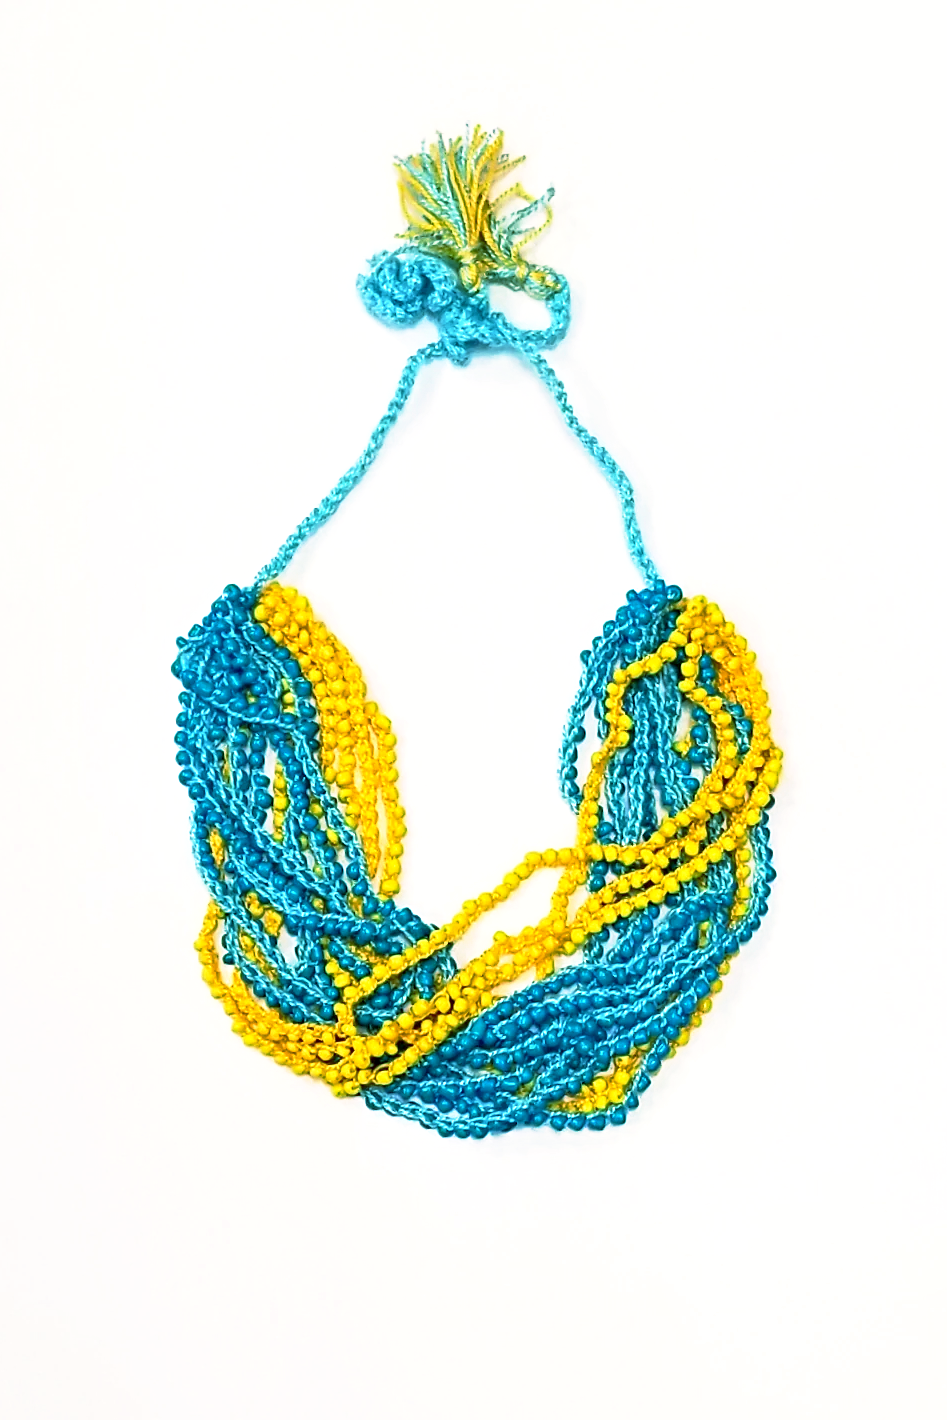 Artisan crafted woven bead necklace. Blue and yellow